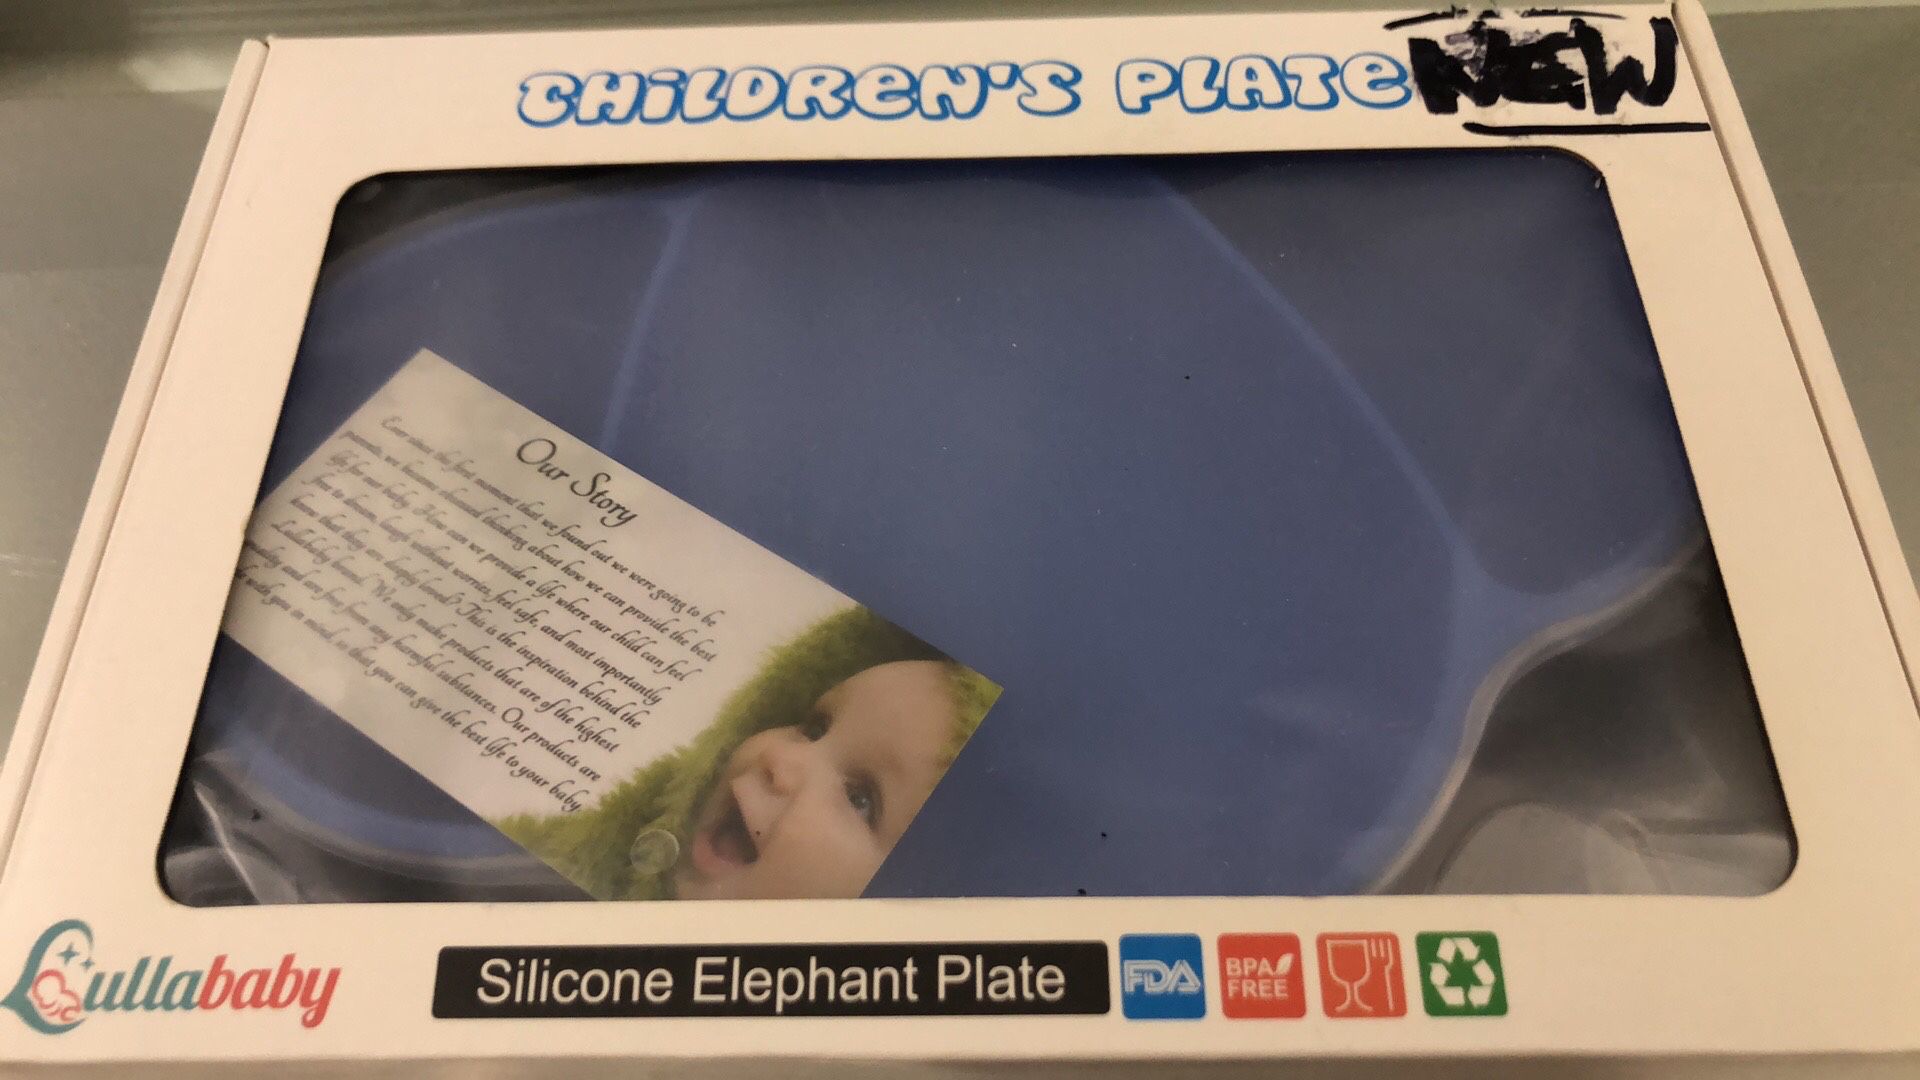 Lullababy Elephant Shaped Toddler Feeding Suction Plate unee and sealed in box